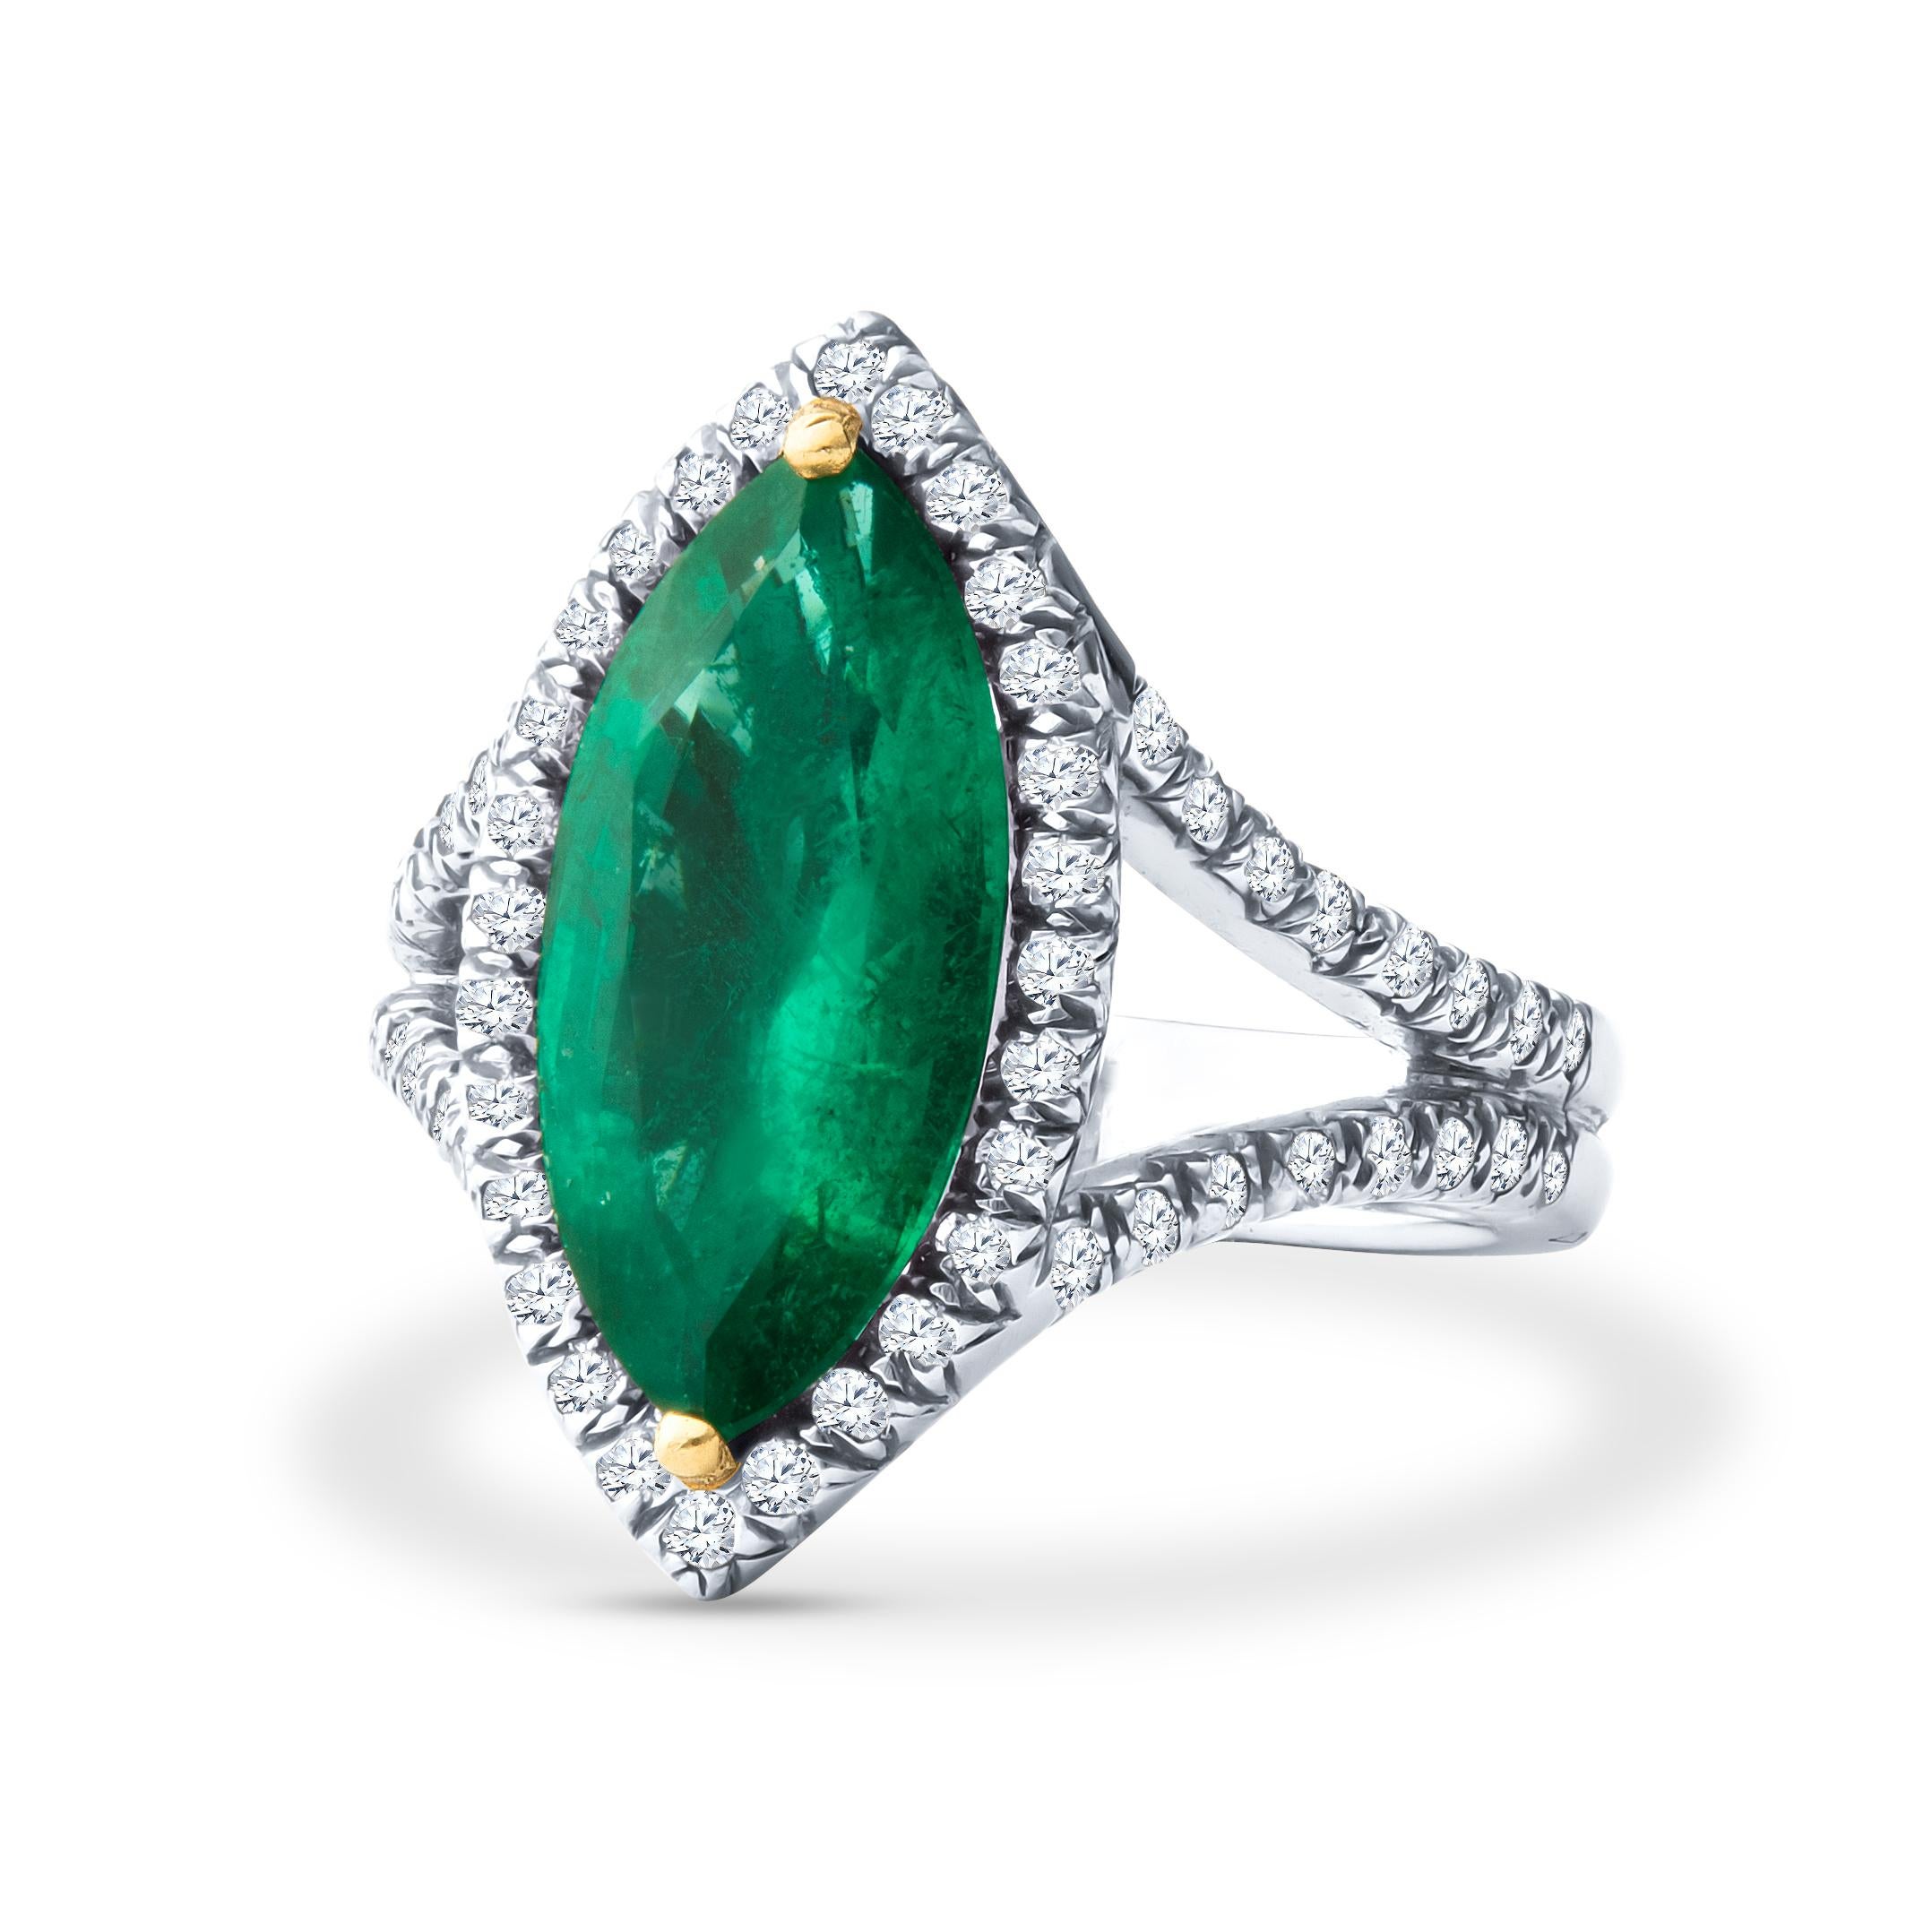 This exquisite ring features a vibrant 6ctw marquise shaped emerald surrounded by 1.07ctw halo of round diamonds forming the halo and split shank band. The ring itself is made of platinum and is currently a size 6.5.  It can be resized upon request.